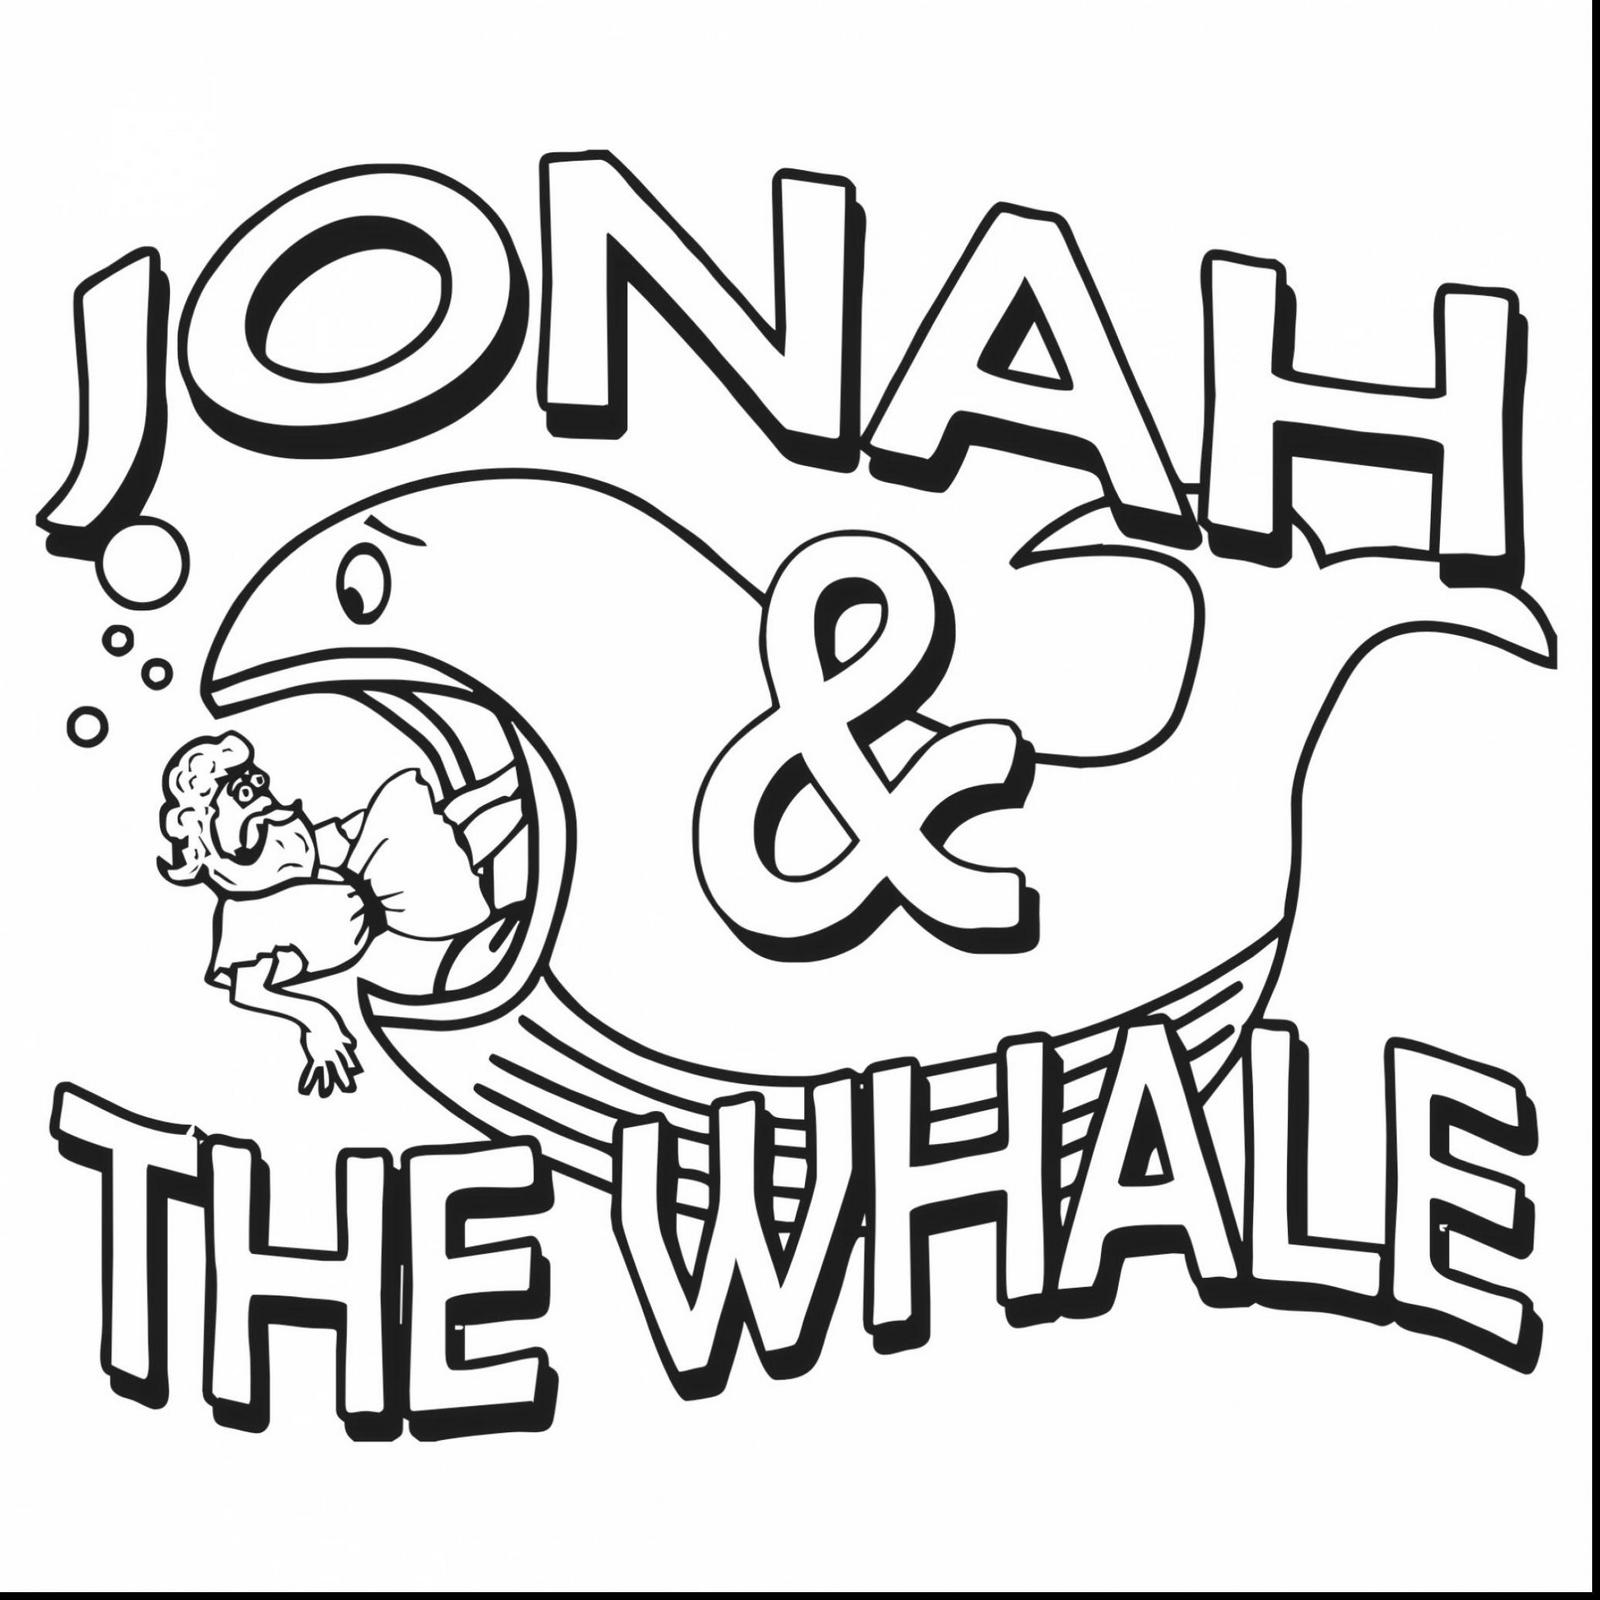 A Wonderful of Collection Stories, Jonah and the Whale Coloring Pages